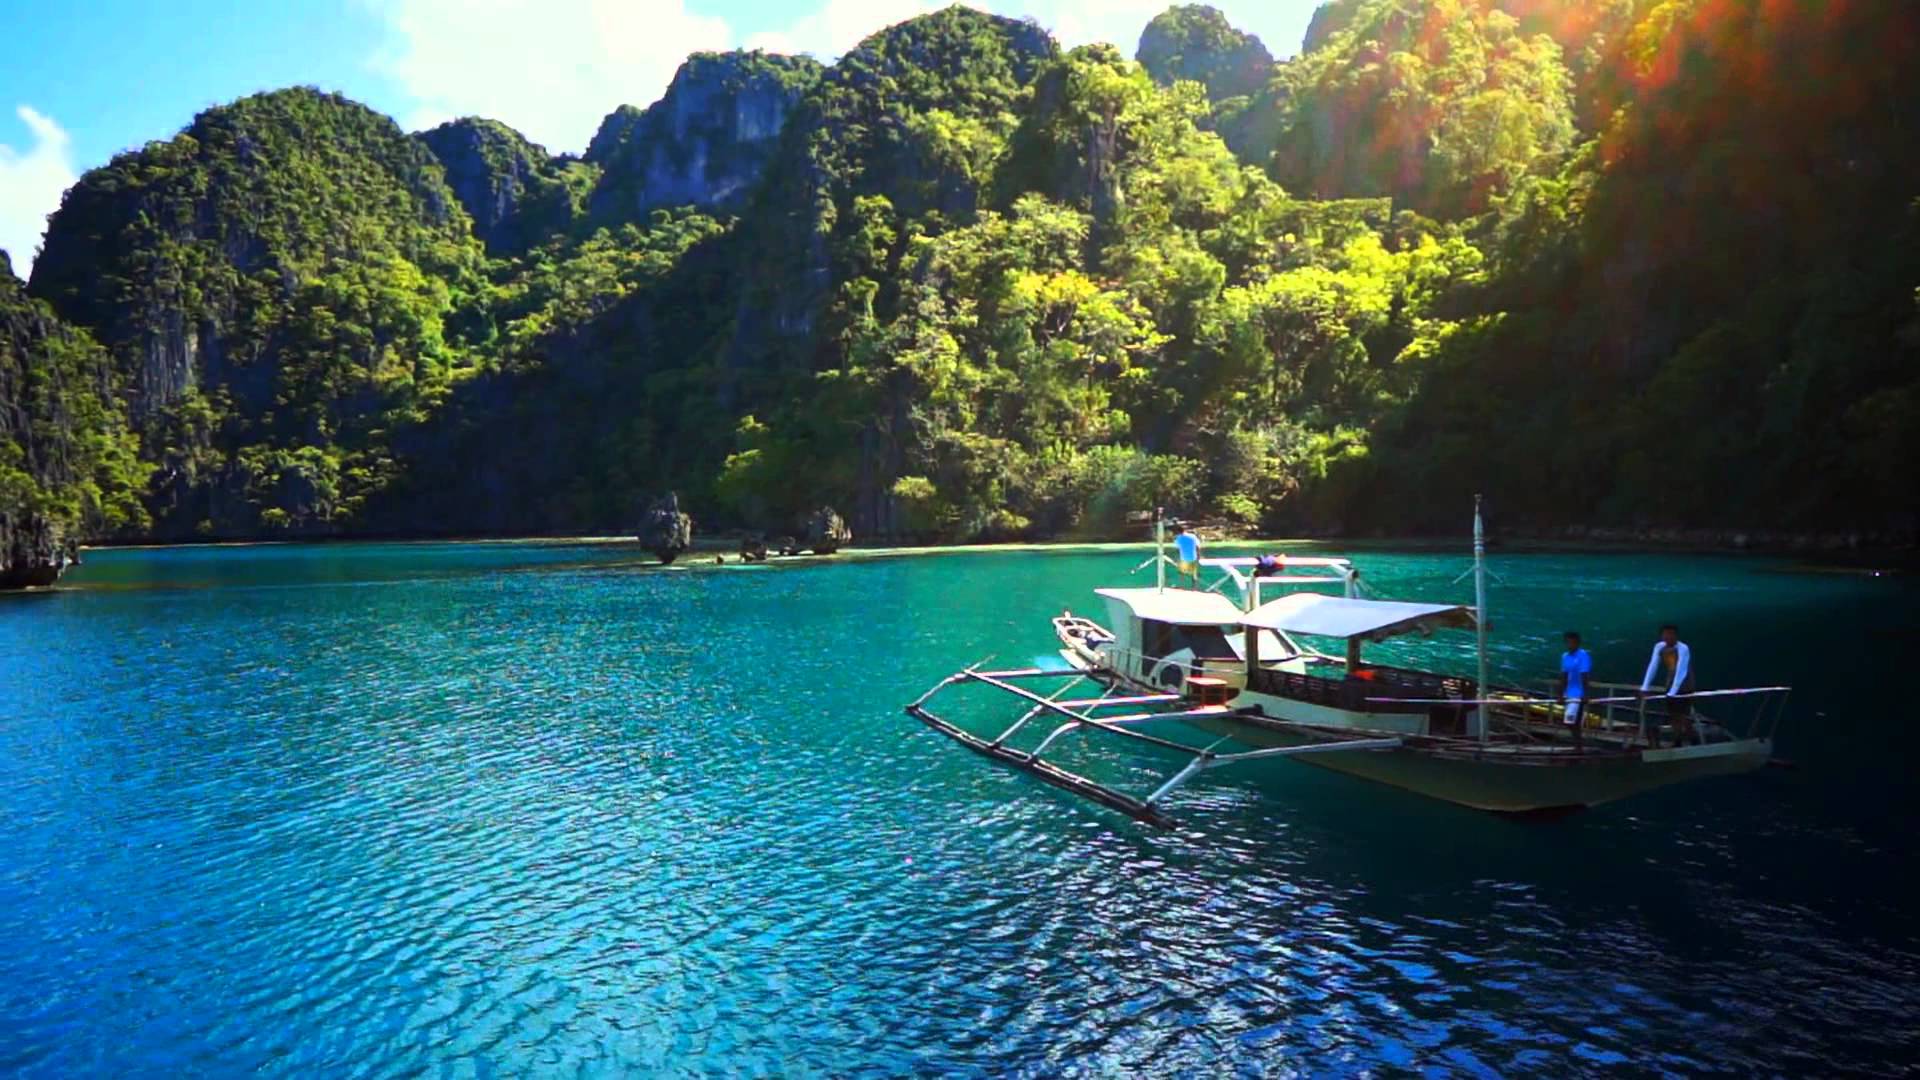 Palawan-a silence heaven of Philippines - All About Croatian Islands